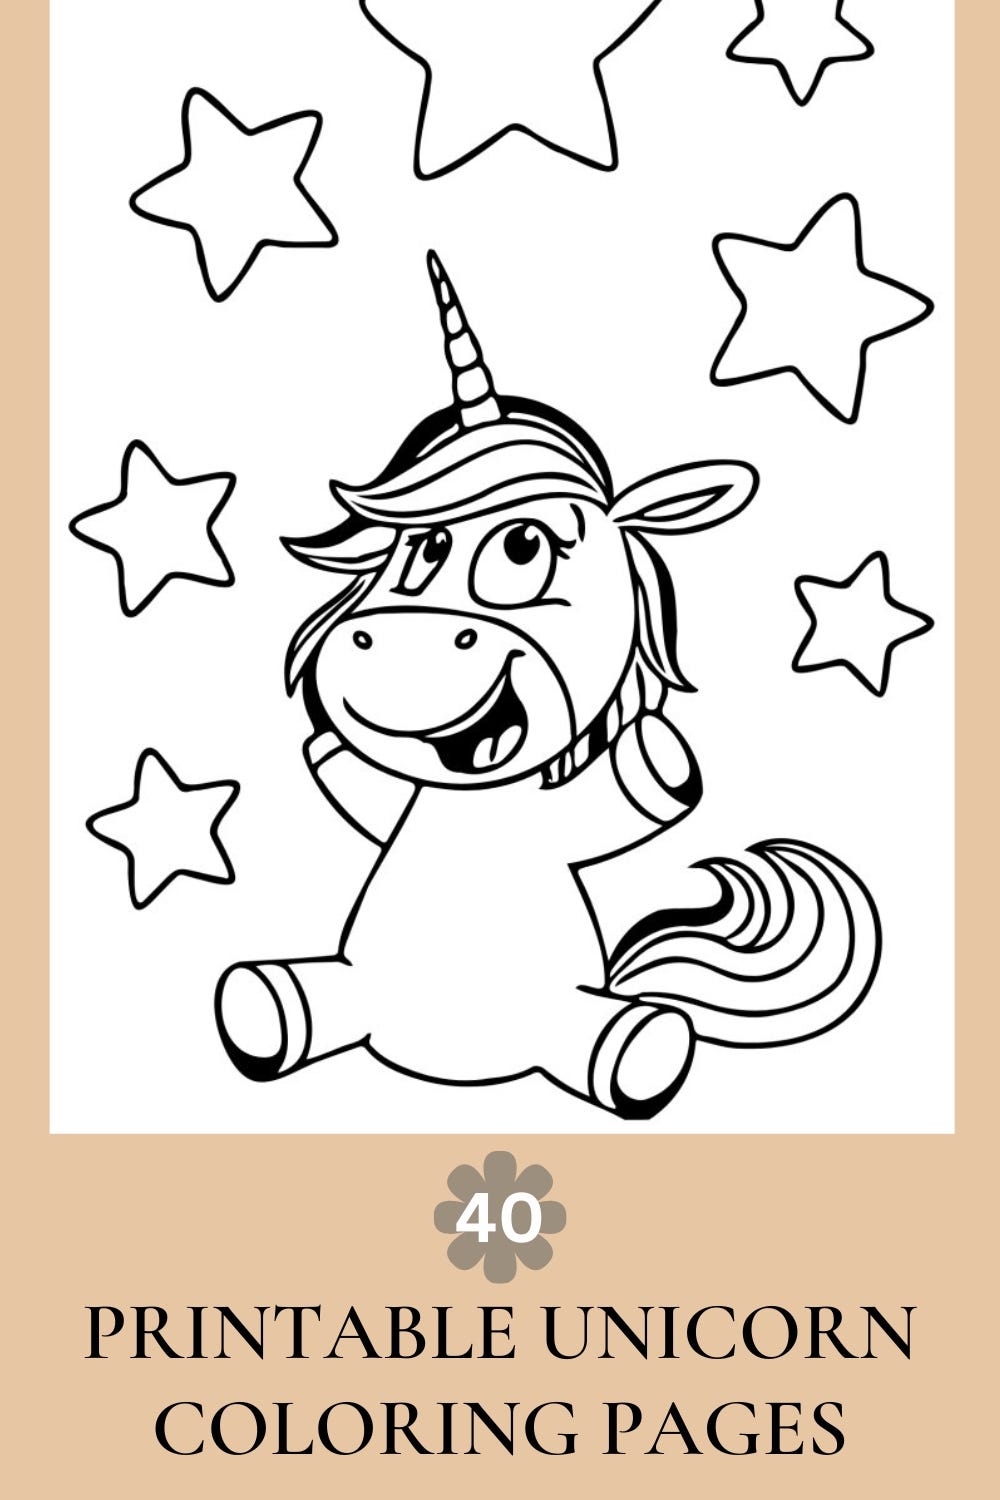 40 Free Printable Unicorn Coloring Pages